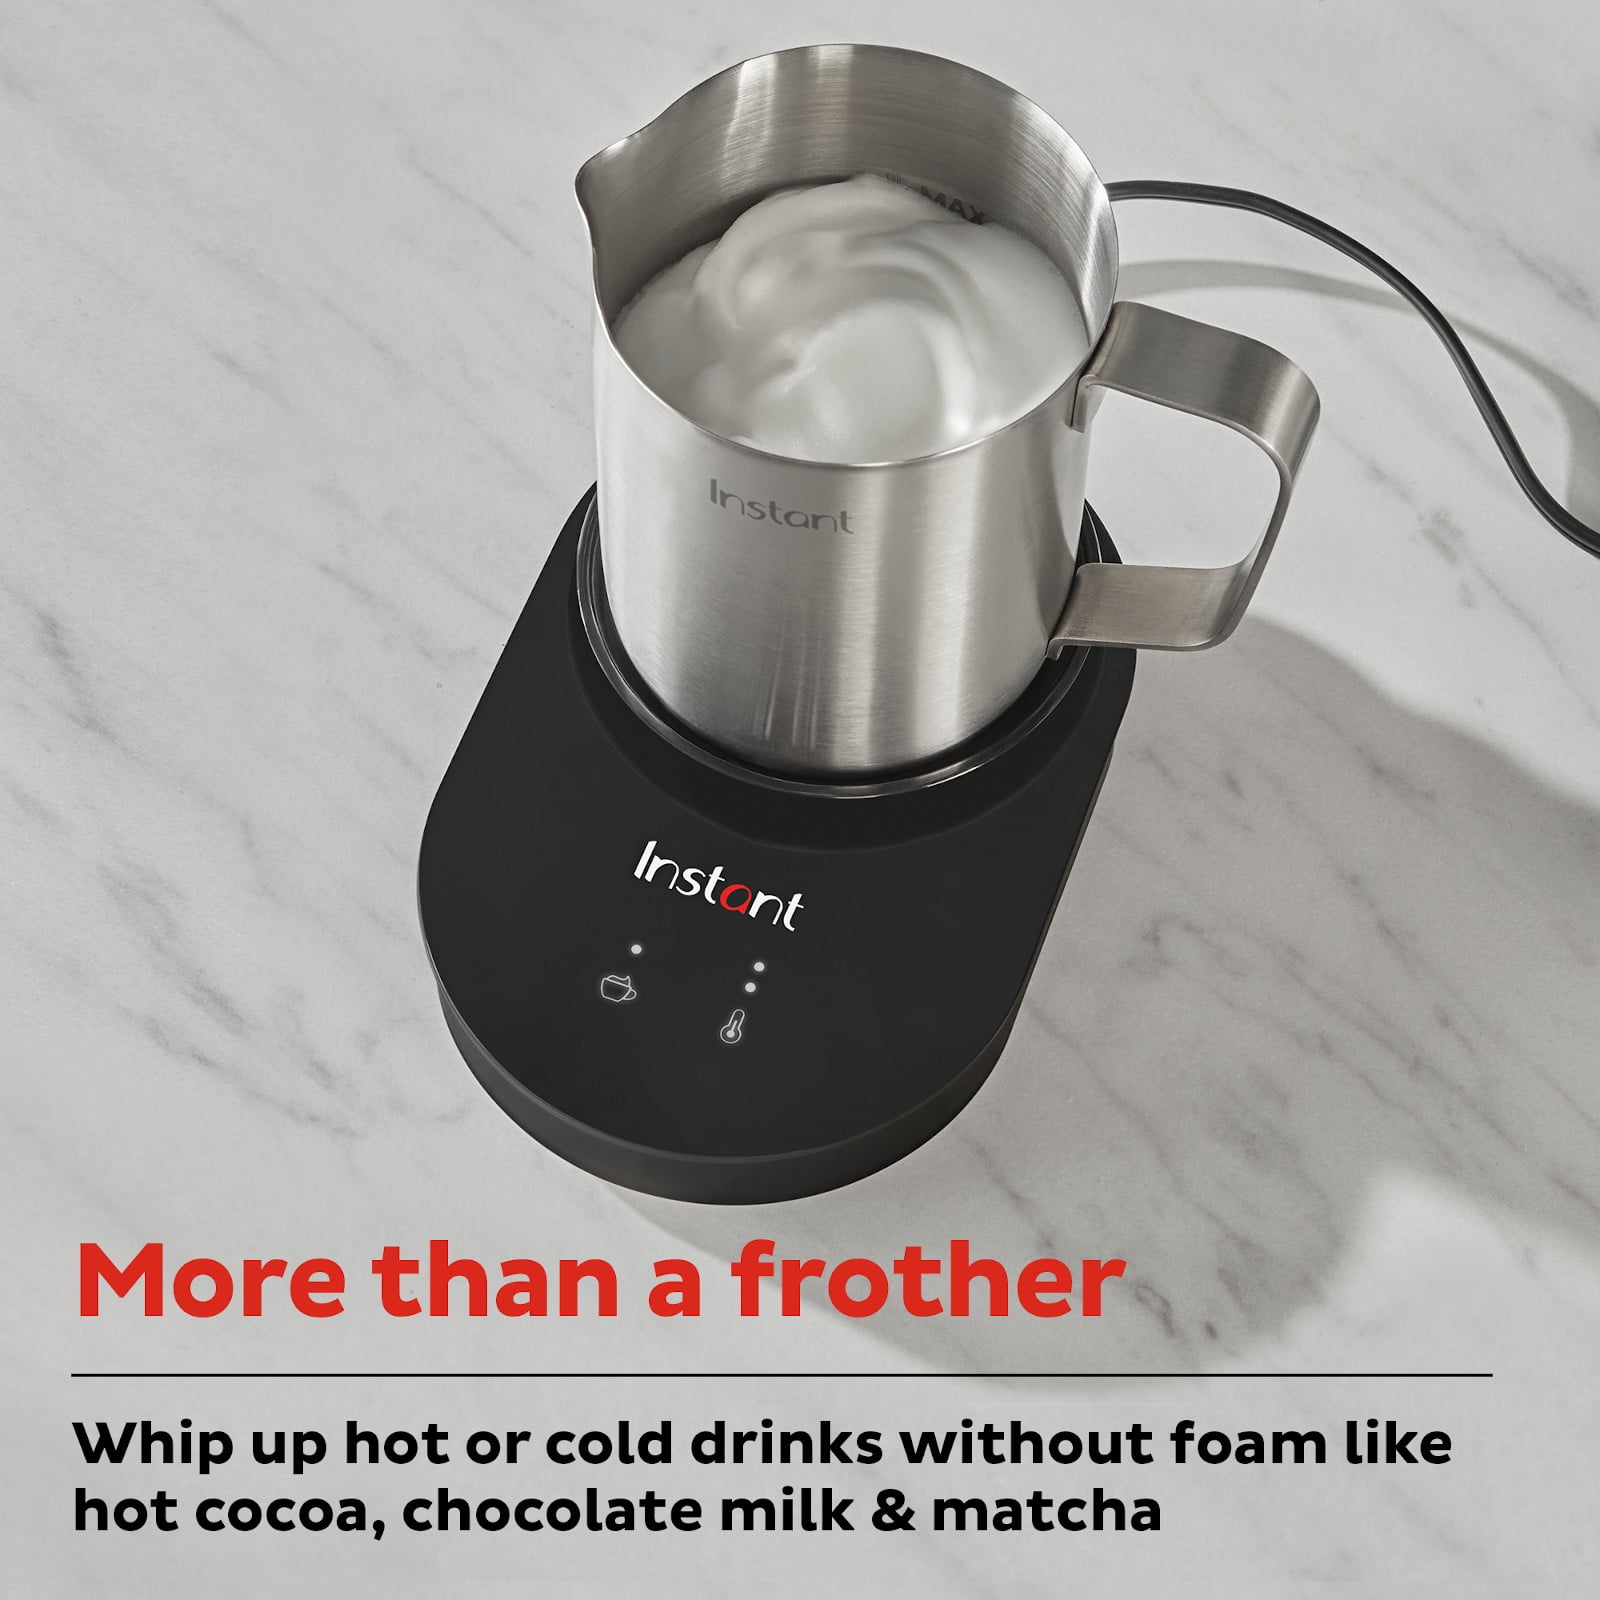 Instant Magic Froth 9-in-1 Electric Milk Steamer and Frother, 17oz  Stainless Steel Pitcher, Hot and Cold Foam Maker and Milk Warmer